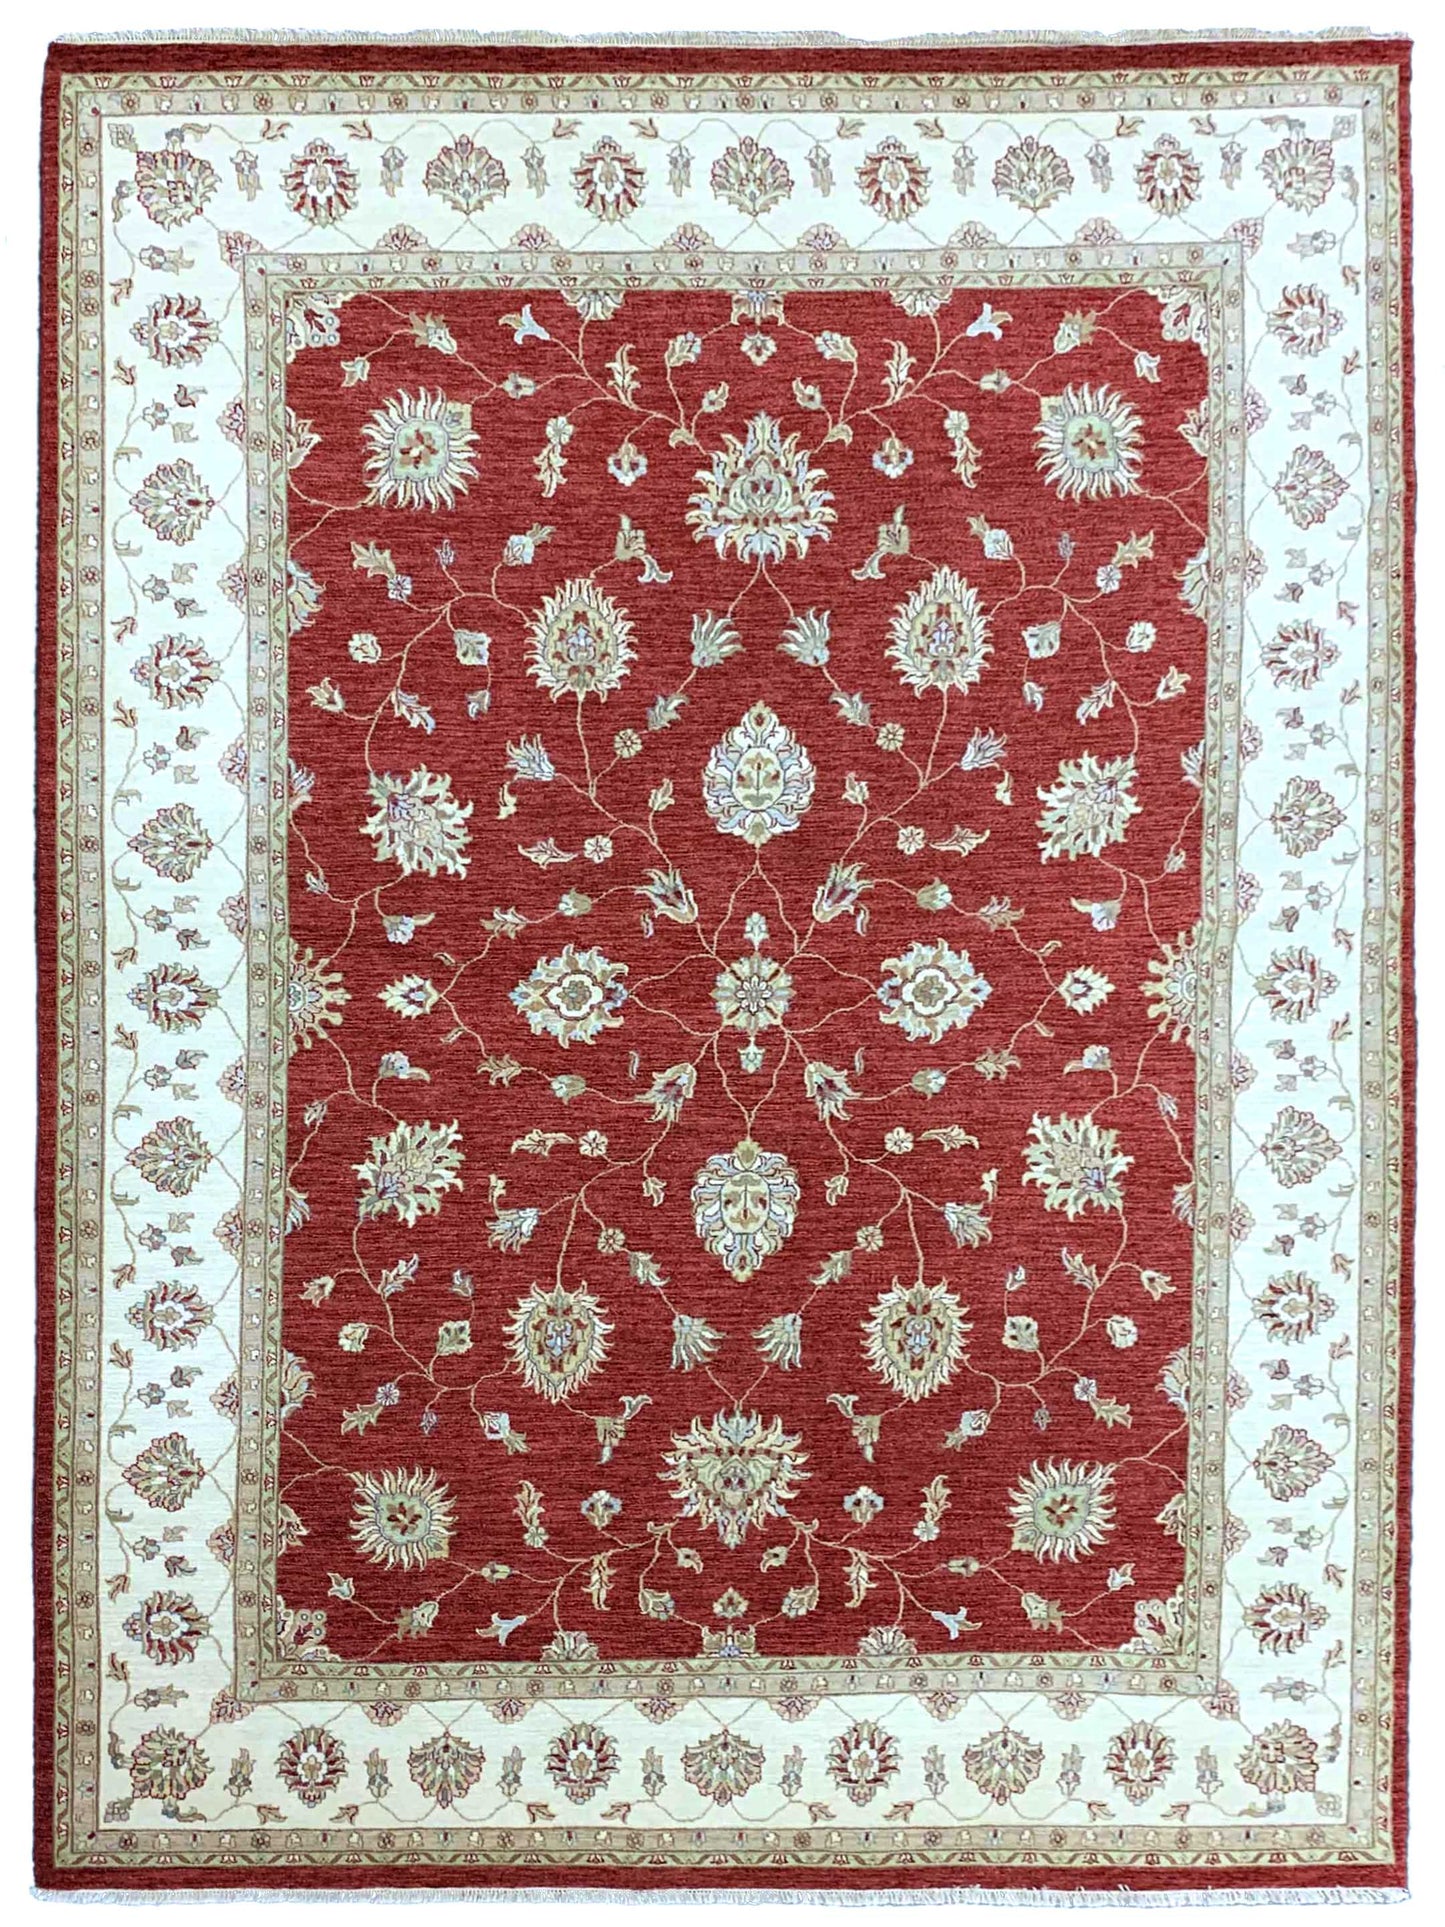 Artisan Zara ZL-102 Red Traditional Knotted Rug